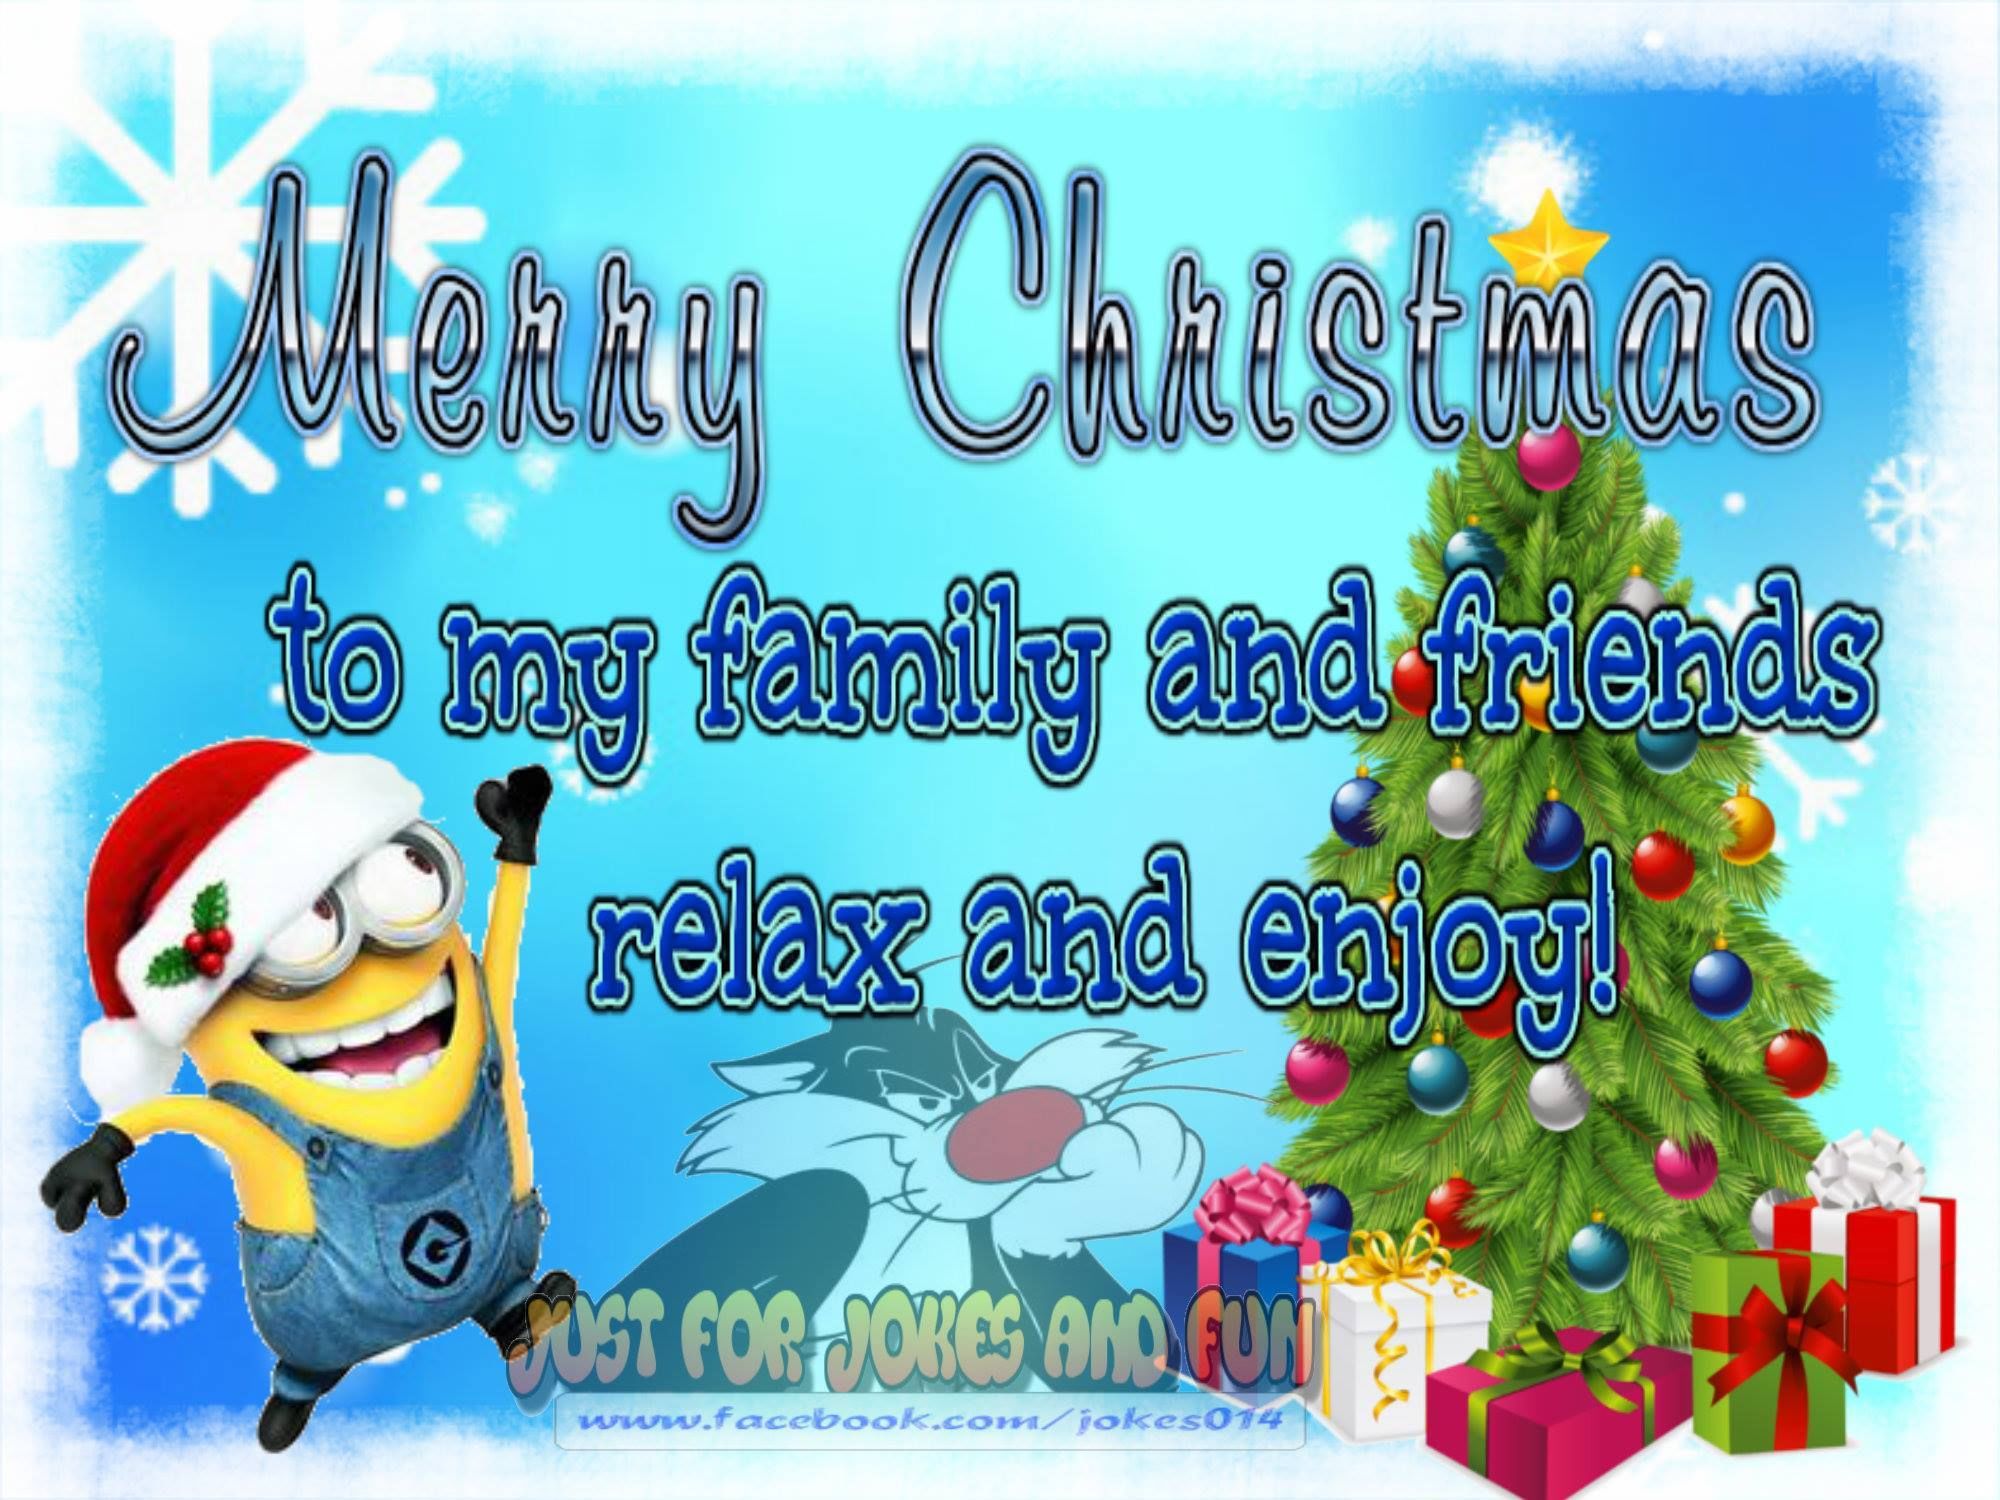 75 Best Merry Christmas Wishes To Write In Christmas Cards